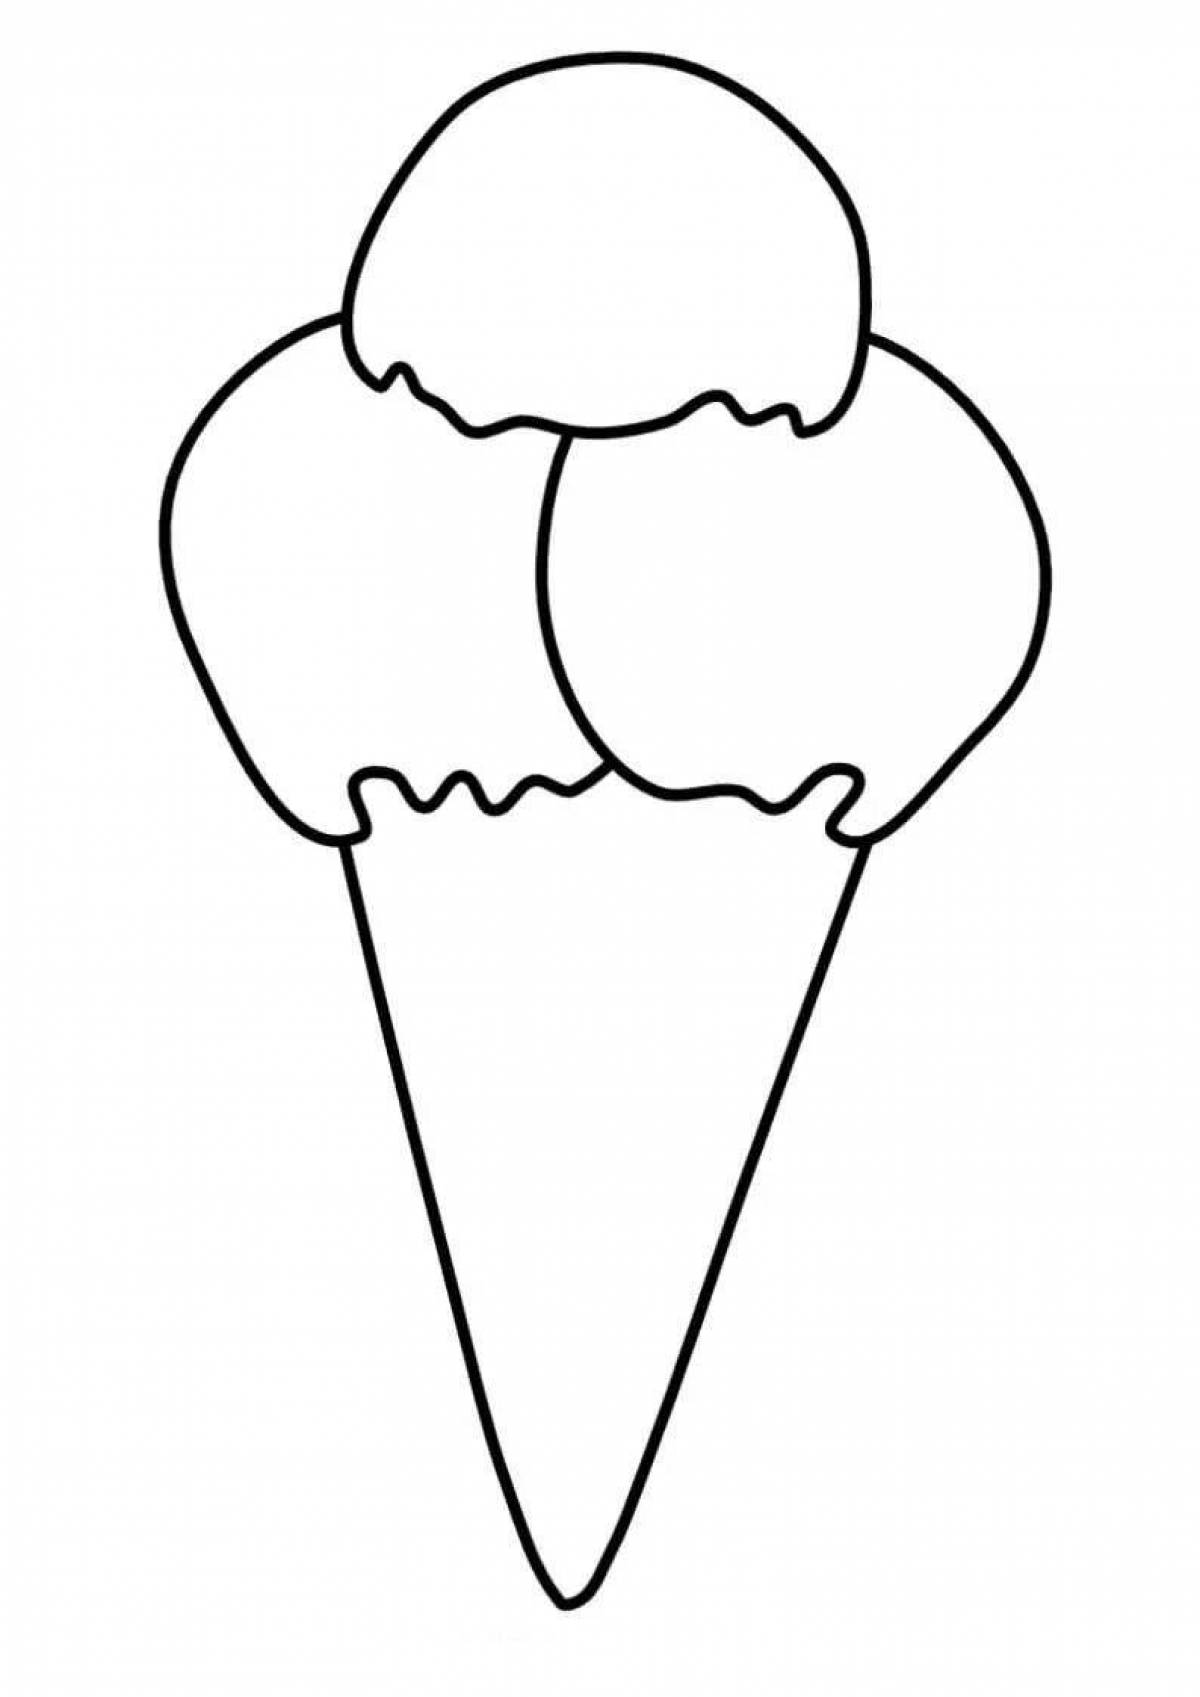 Great ice cream coloring book for kids